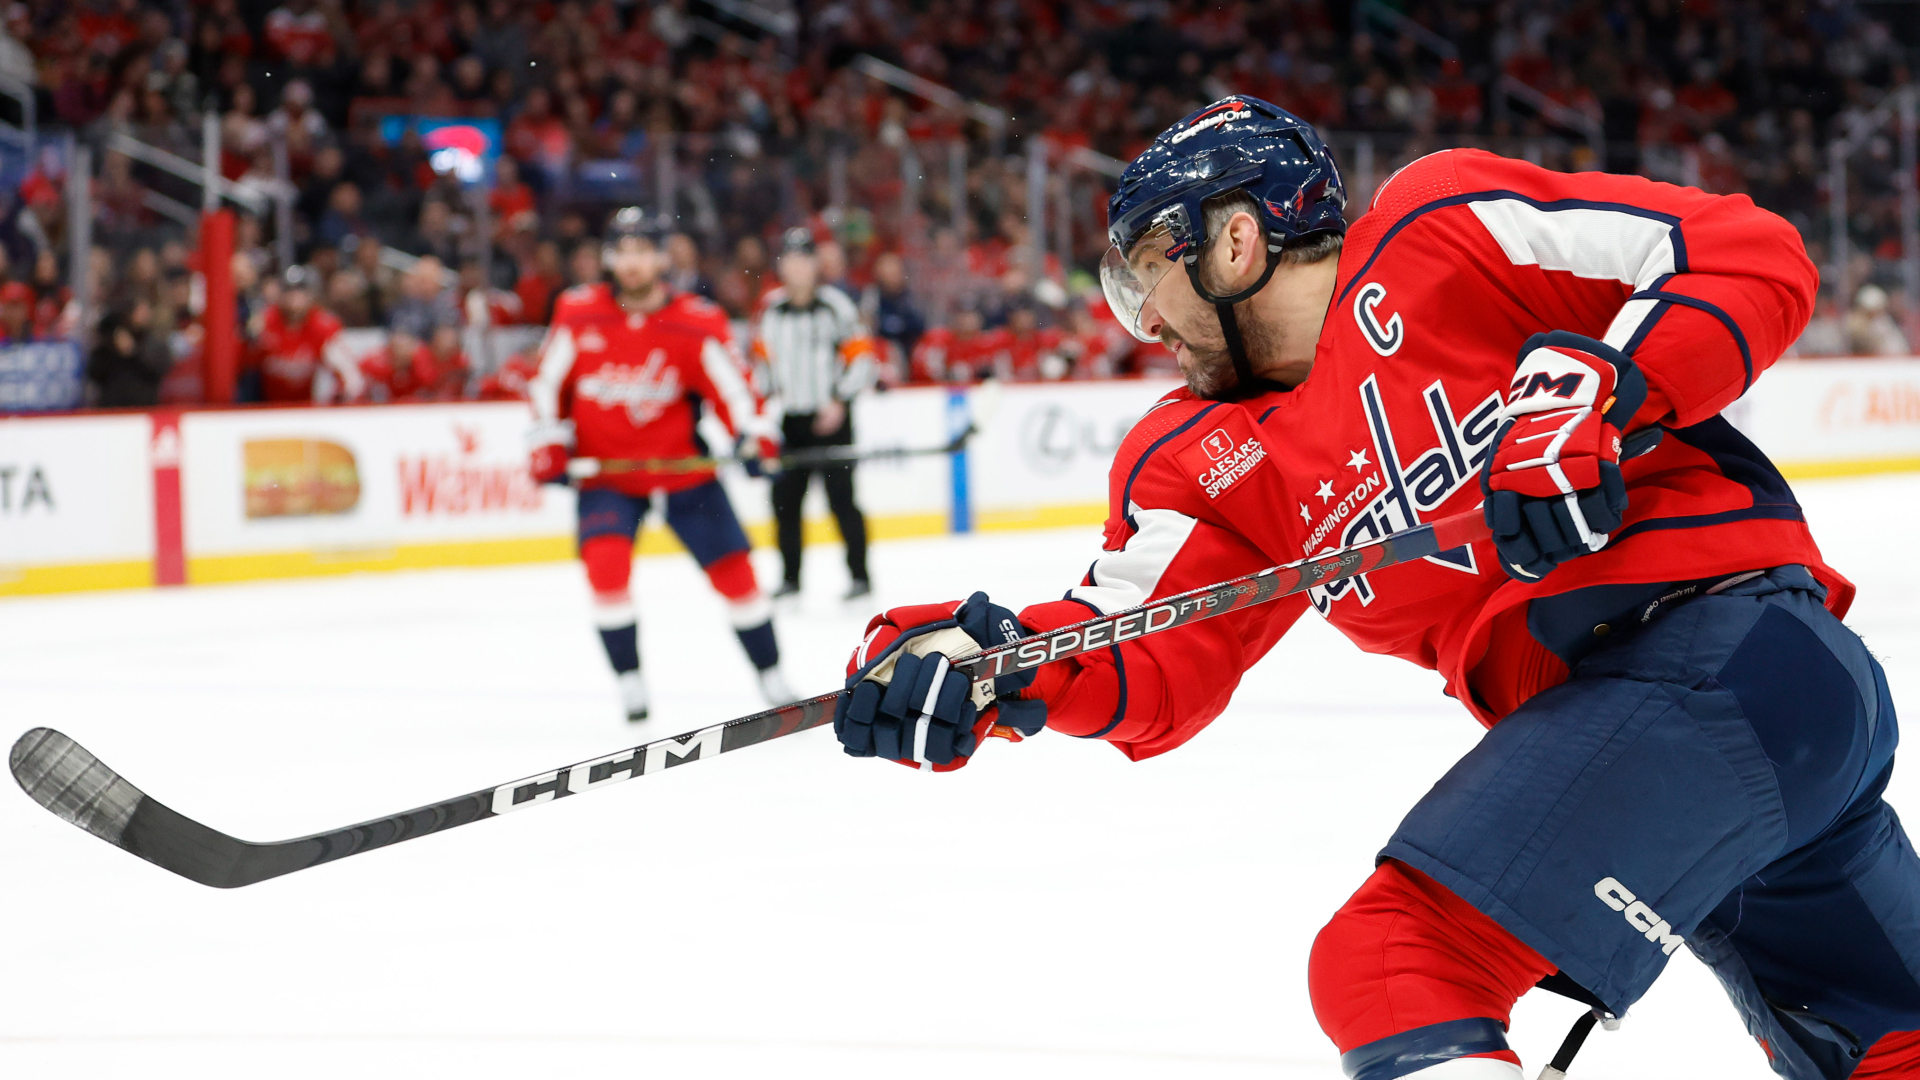 Capitals left wing Alex Ovechkin shoots the puck against the Wild